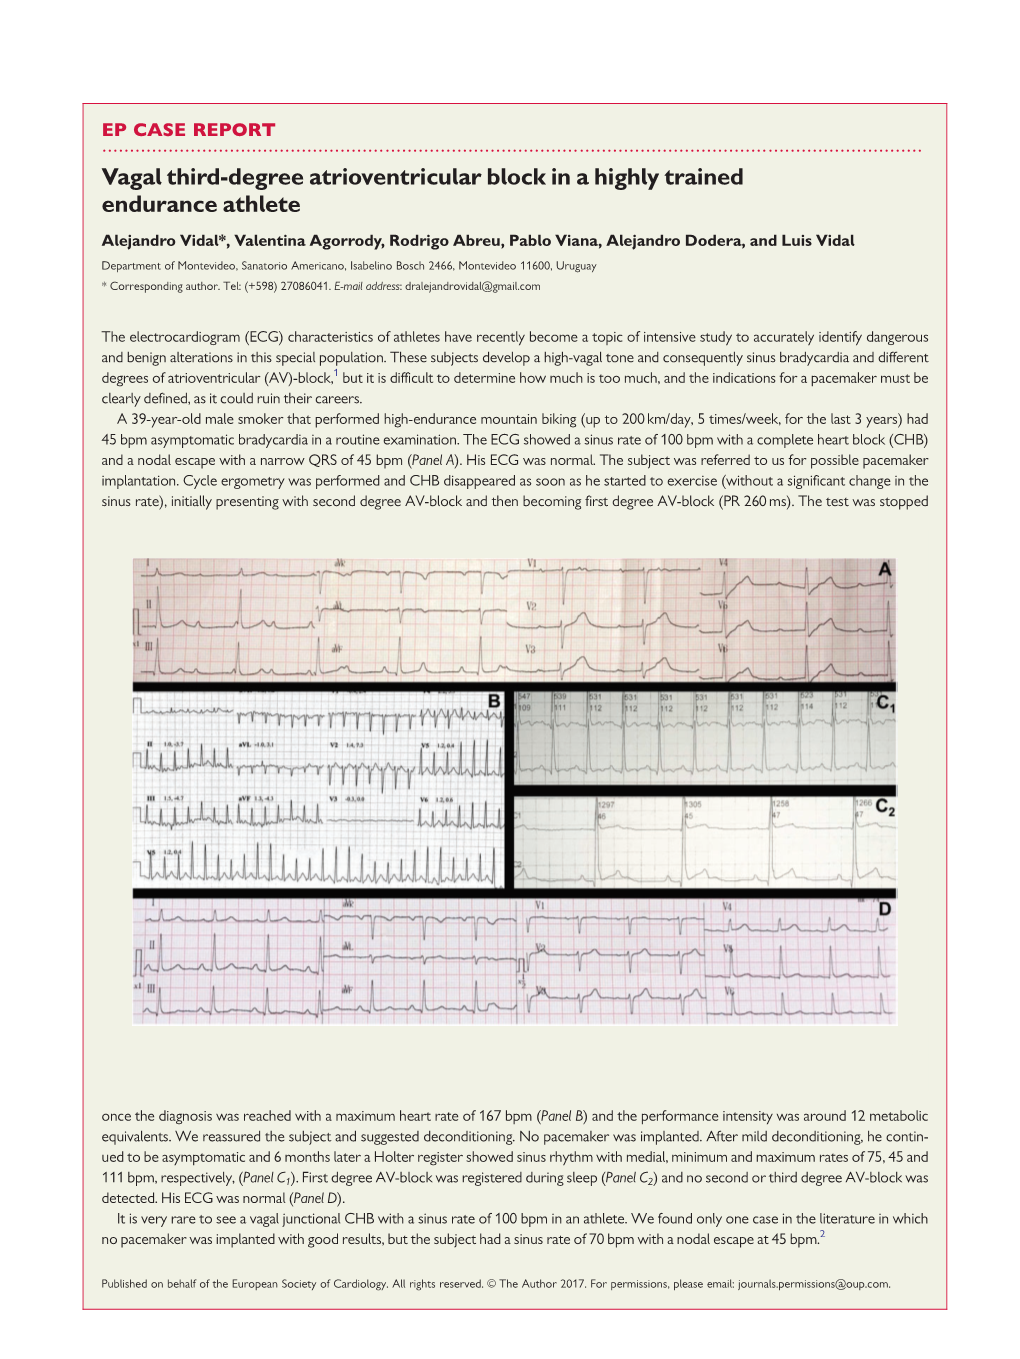 Vagal Third-Degree Atrioventricular Block in a Highly Trained Endurance